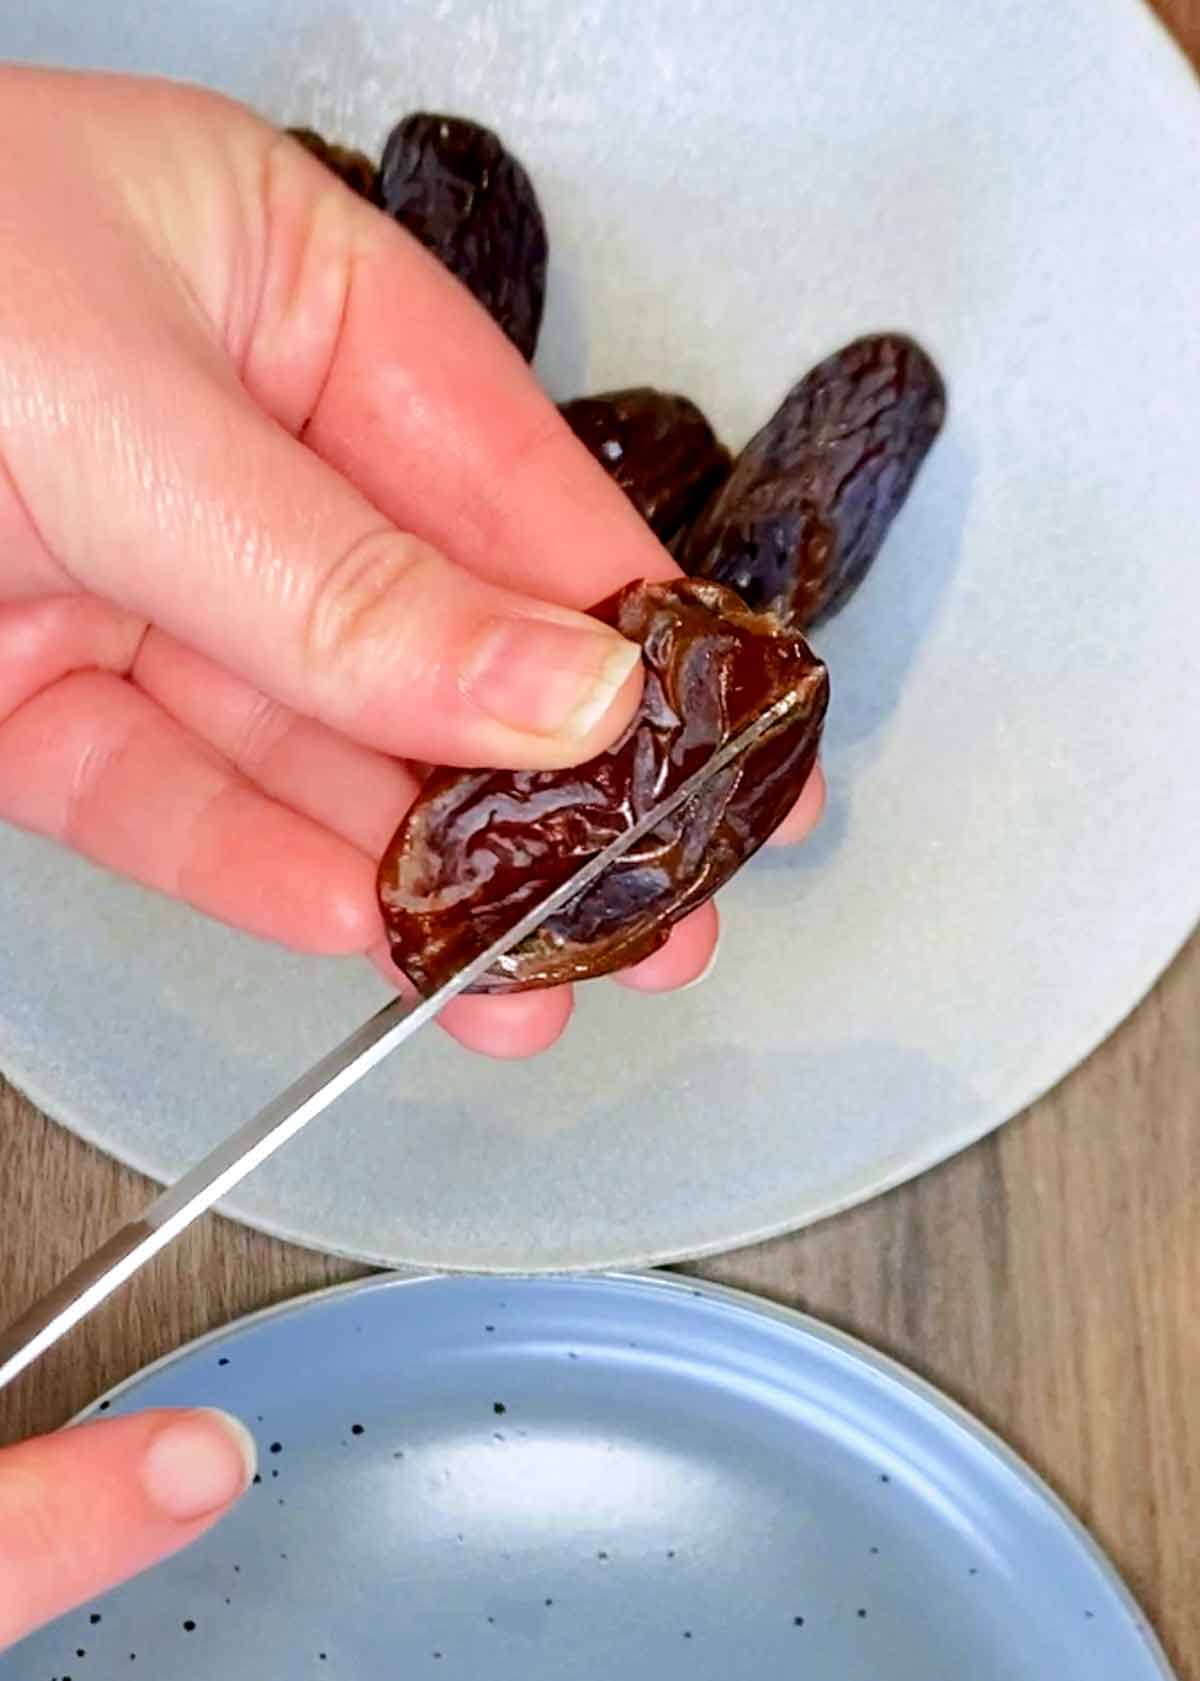 Someone cutting into a date with a knife.